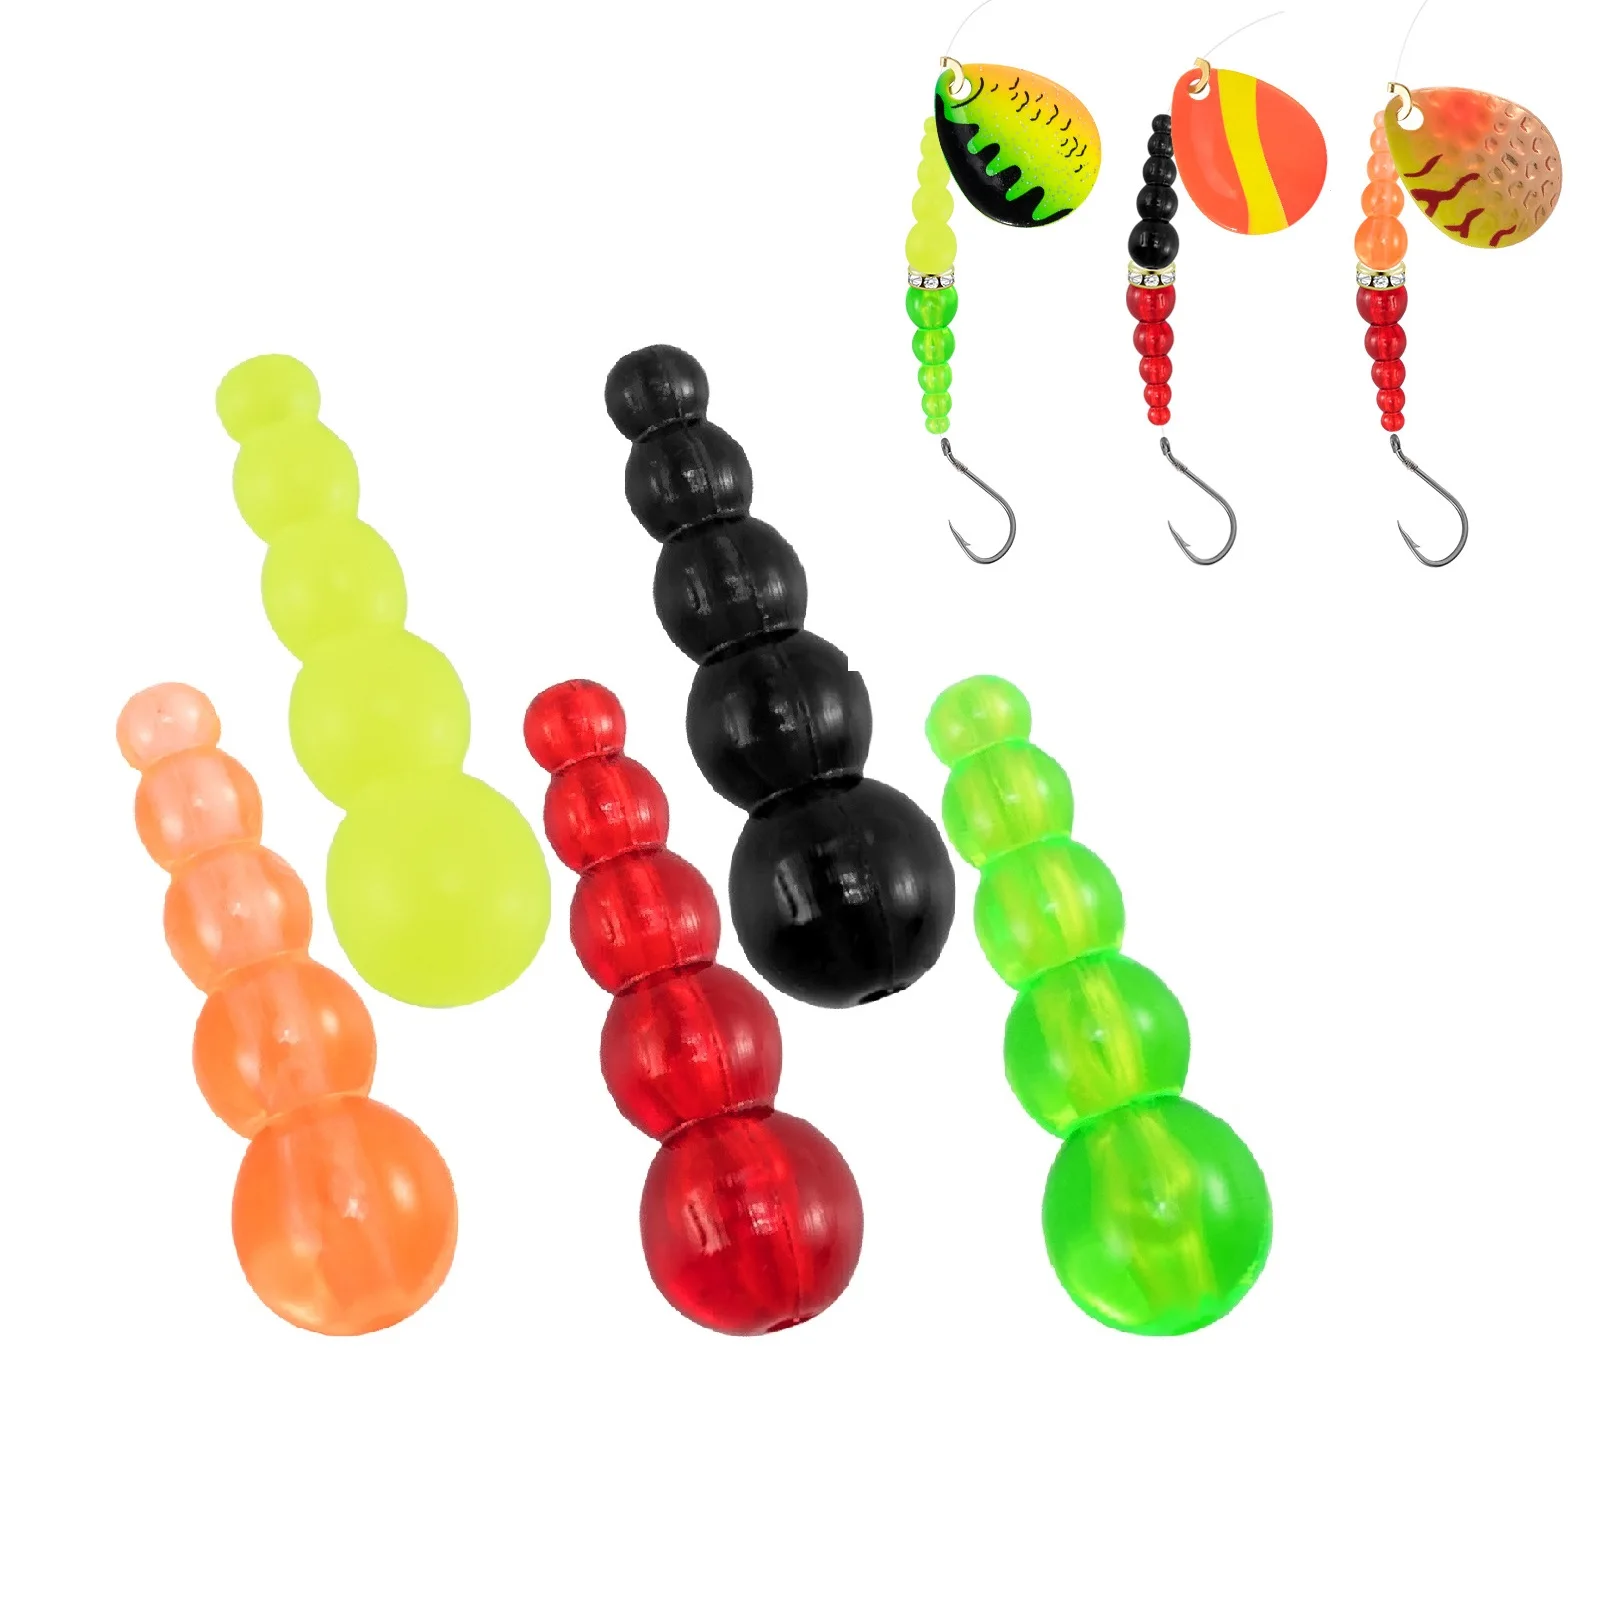 

50pcs Fishing Spinner Making Kit Stacked Beads Freshwater for Spinnerbait Walleye Rig Inline Spinner Trout Bass Crappies Perch